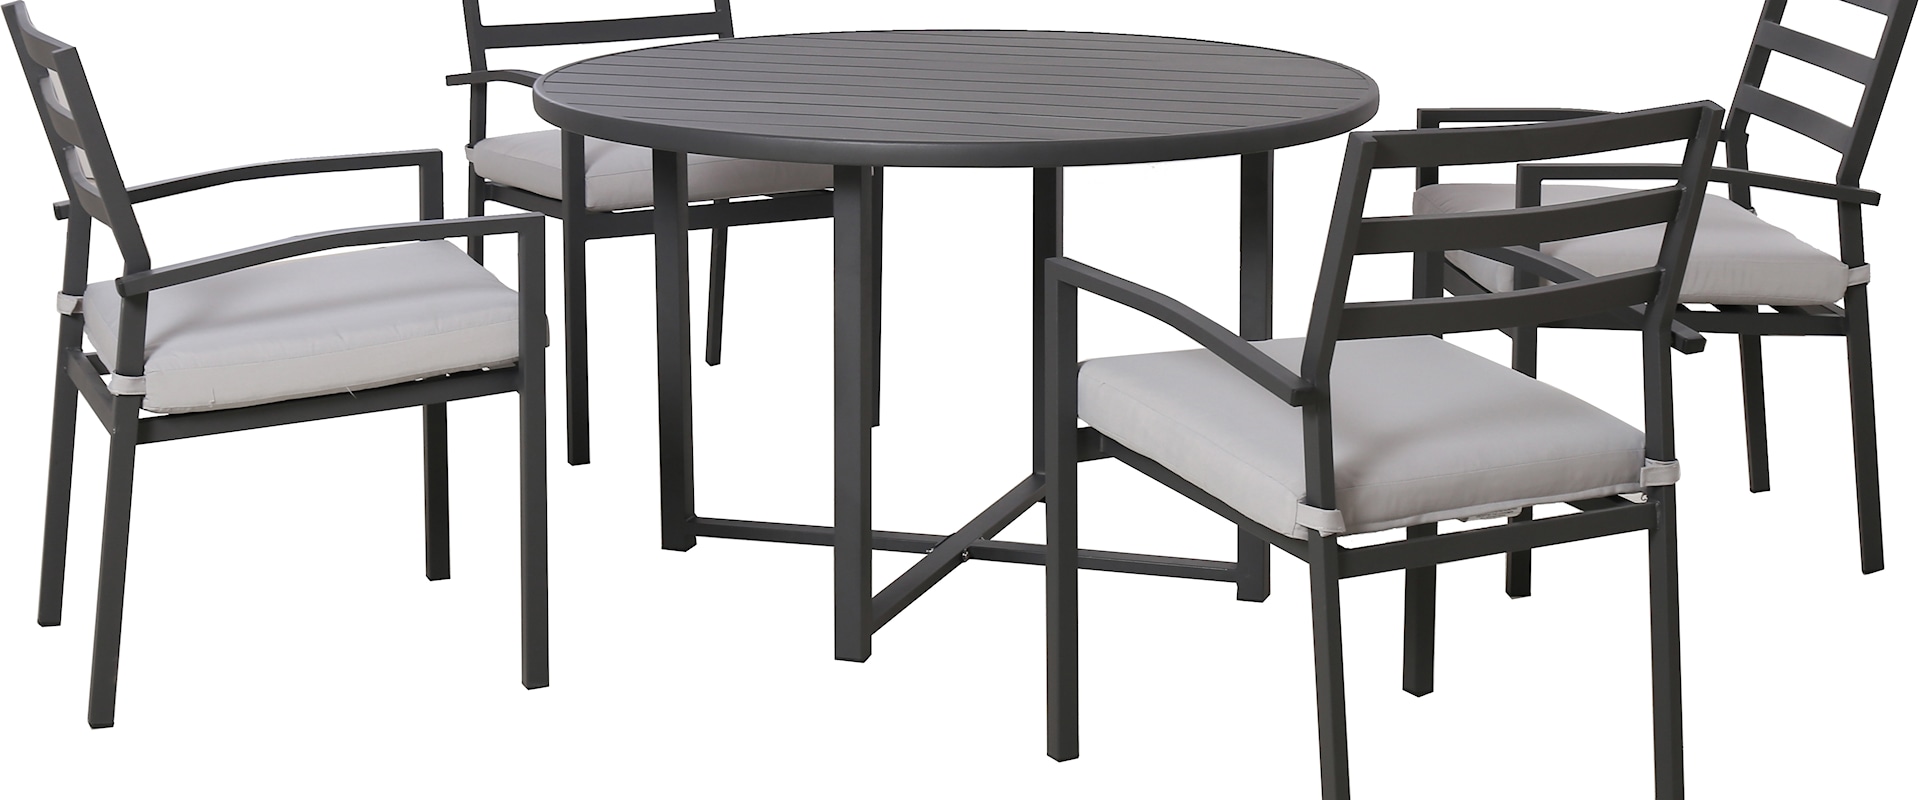 Outdoor Dining Table and Chair Set